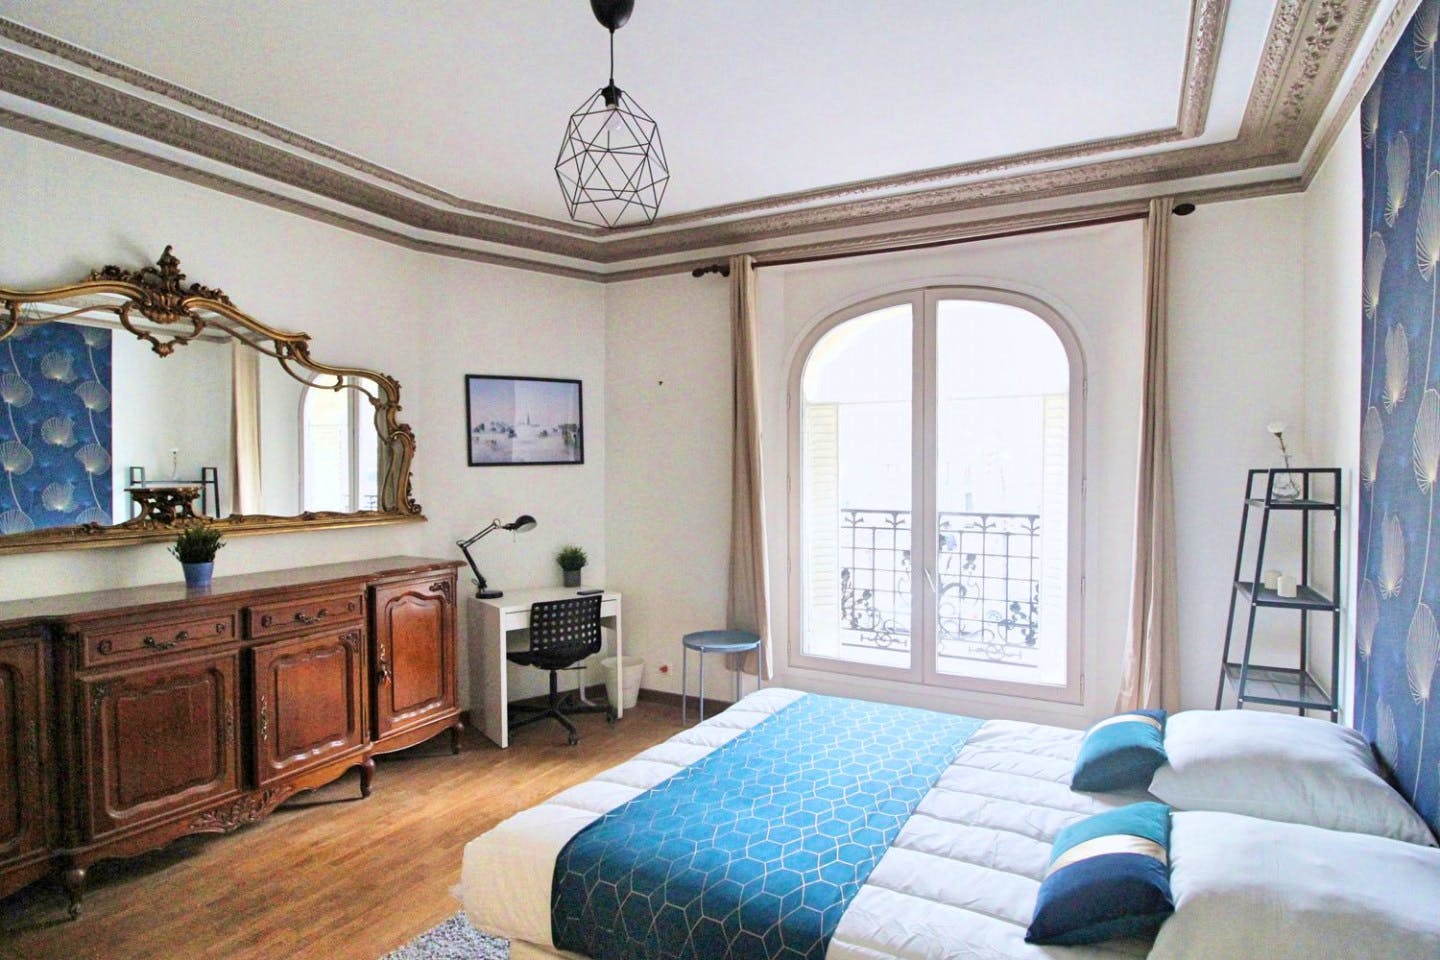 Charming apartment with a beautiful high ceiling located in the 12th district